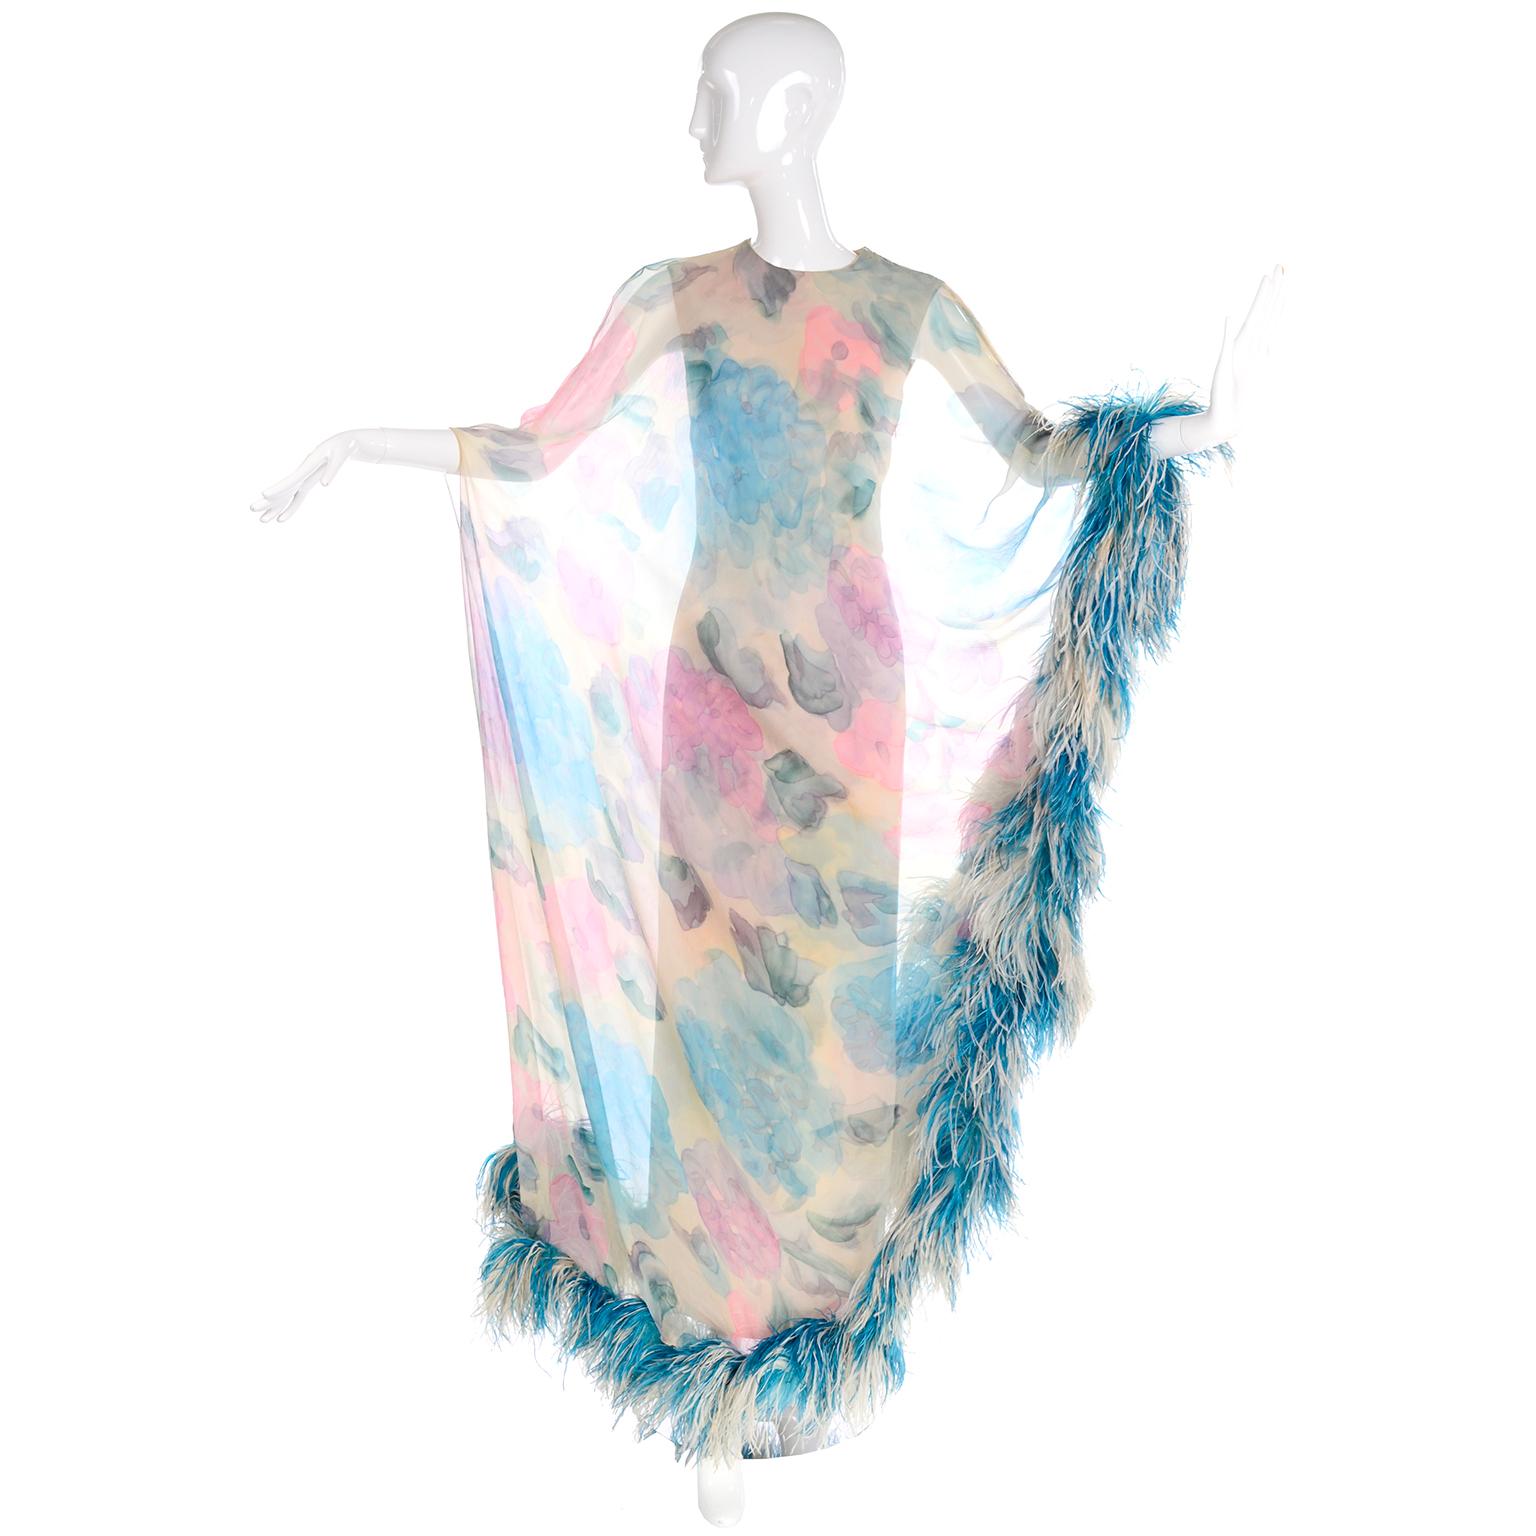 This is a sensational 1960's Sarmi vintage silk dress with a silk chiffon sheer caftan style overdress lined with dyed ostrich feathers. The fitted under Dress is fully lined and has the same blue, pink and cream floral print as the sheer overly.